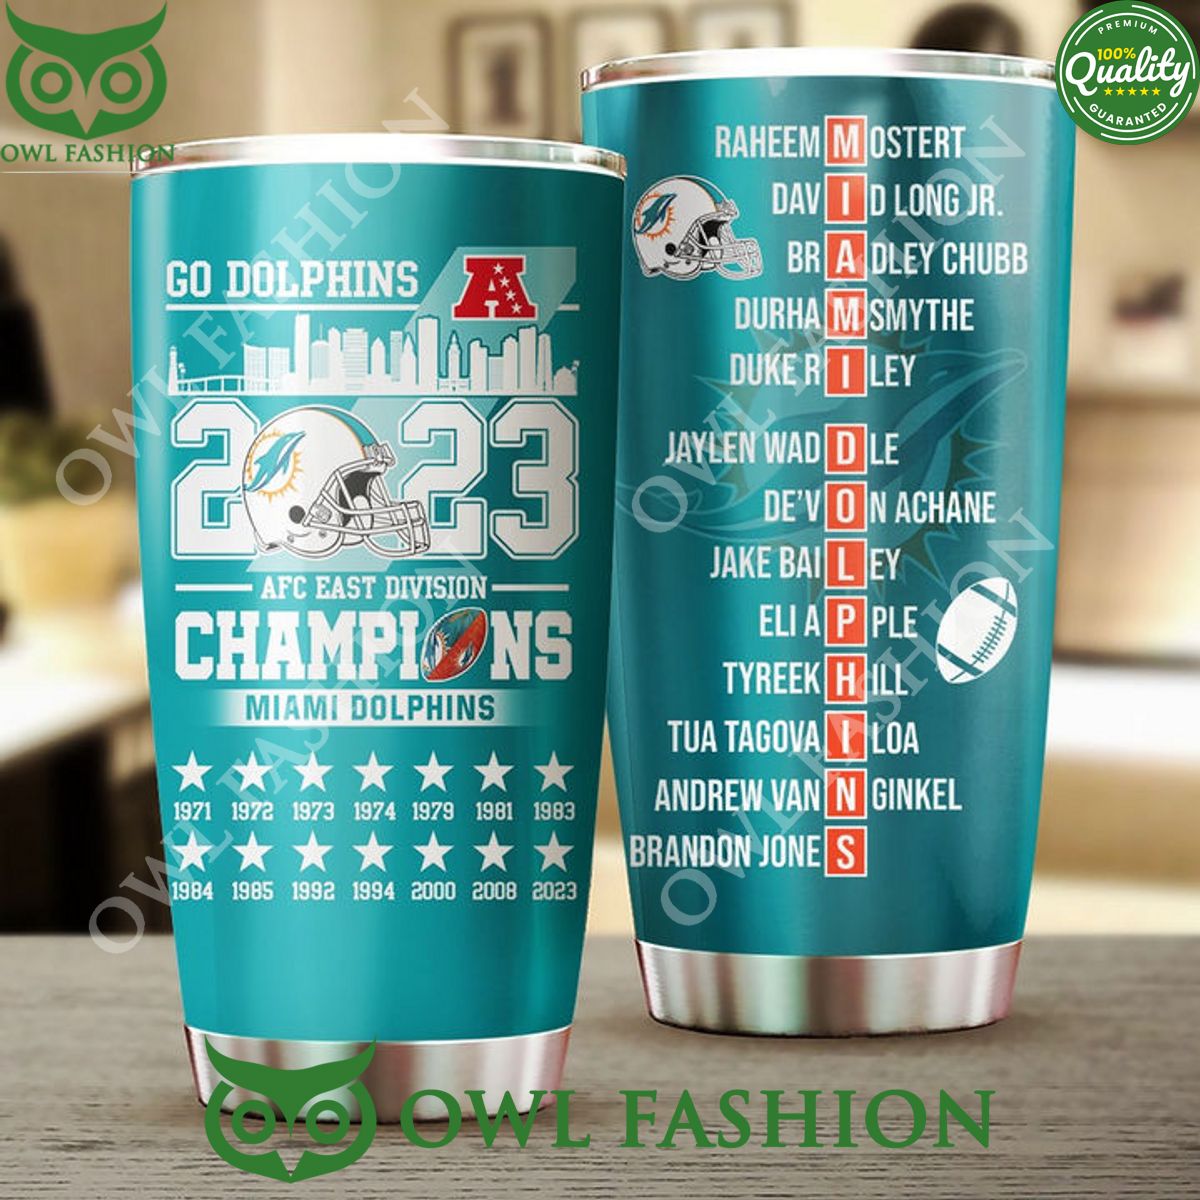 Miami Dolphins AFC East Division Champions Tumbler Cup 2023